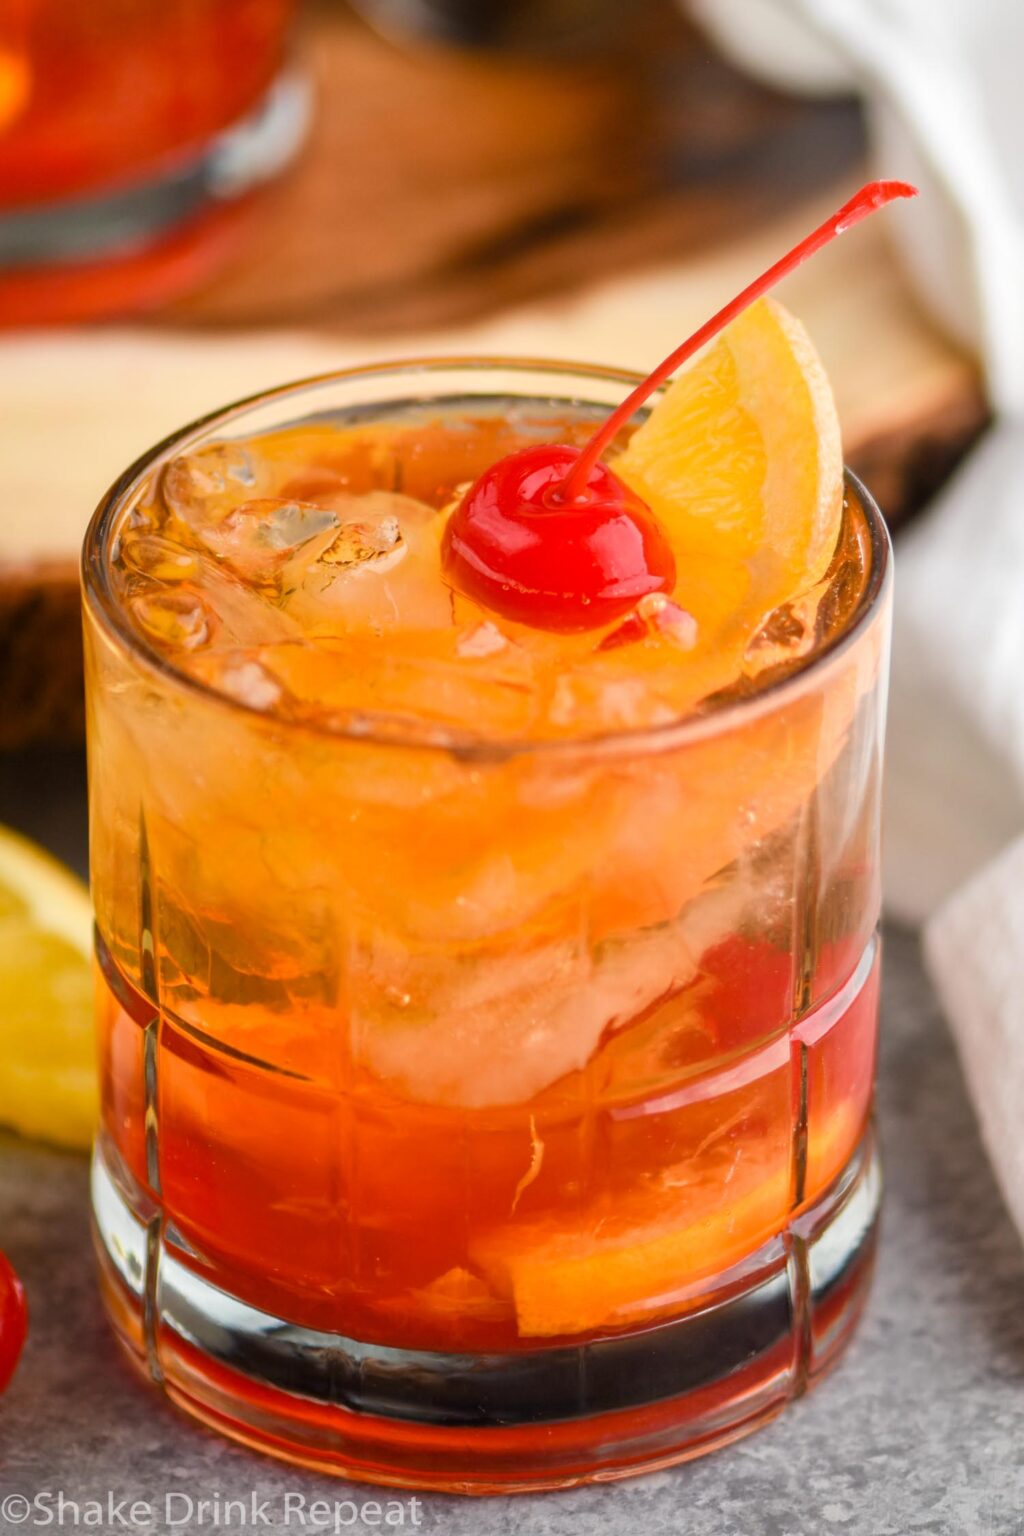 Wisconsin Brandy Old Fashioned - Shake Drink Repeat